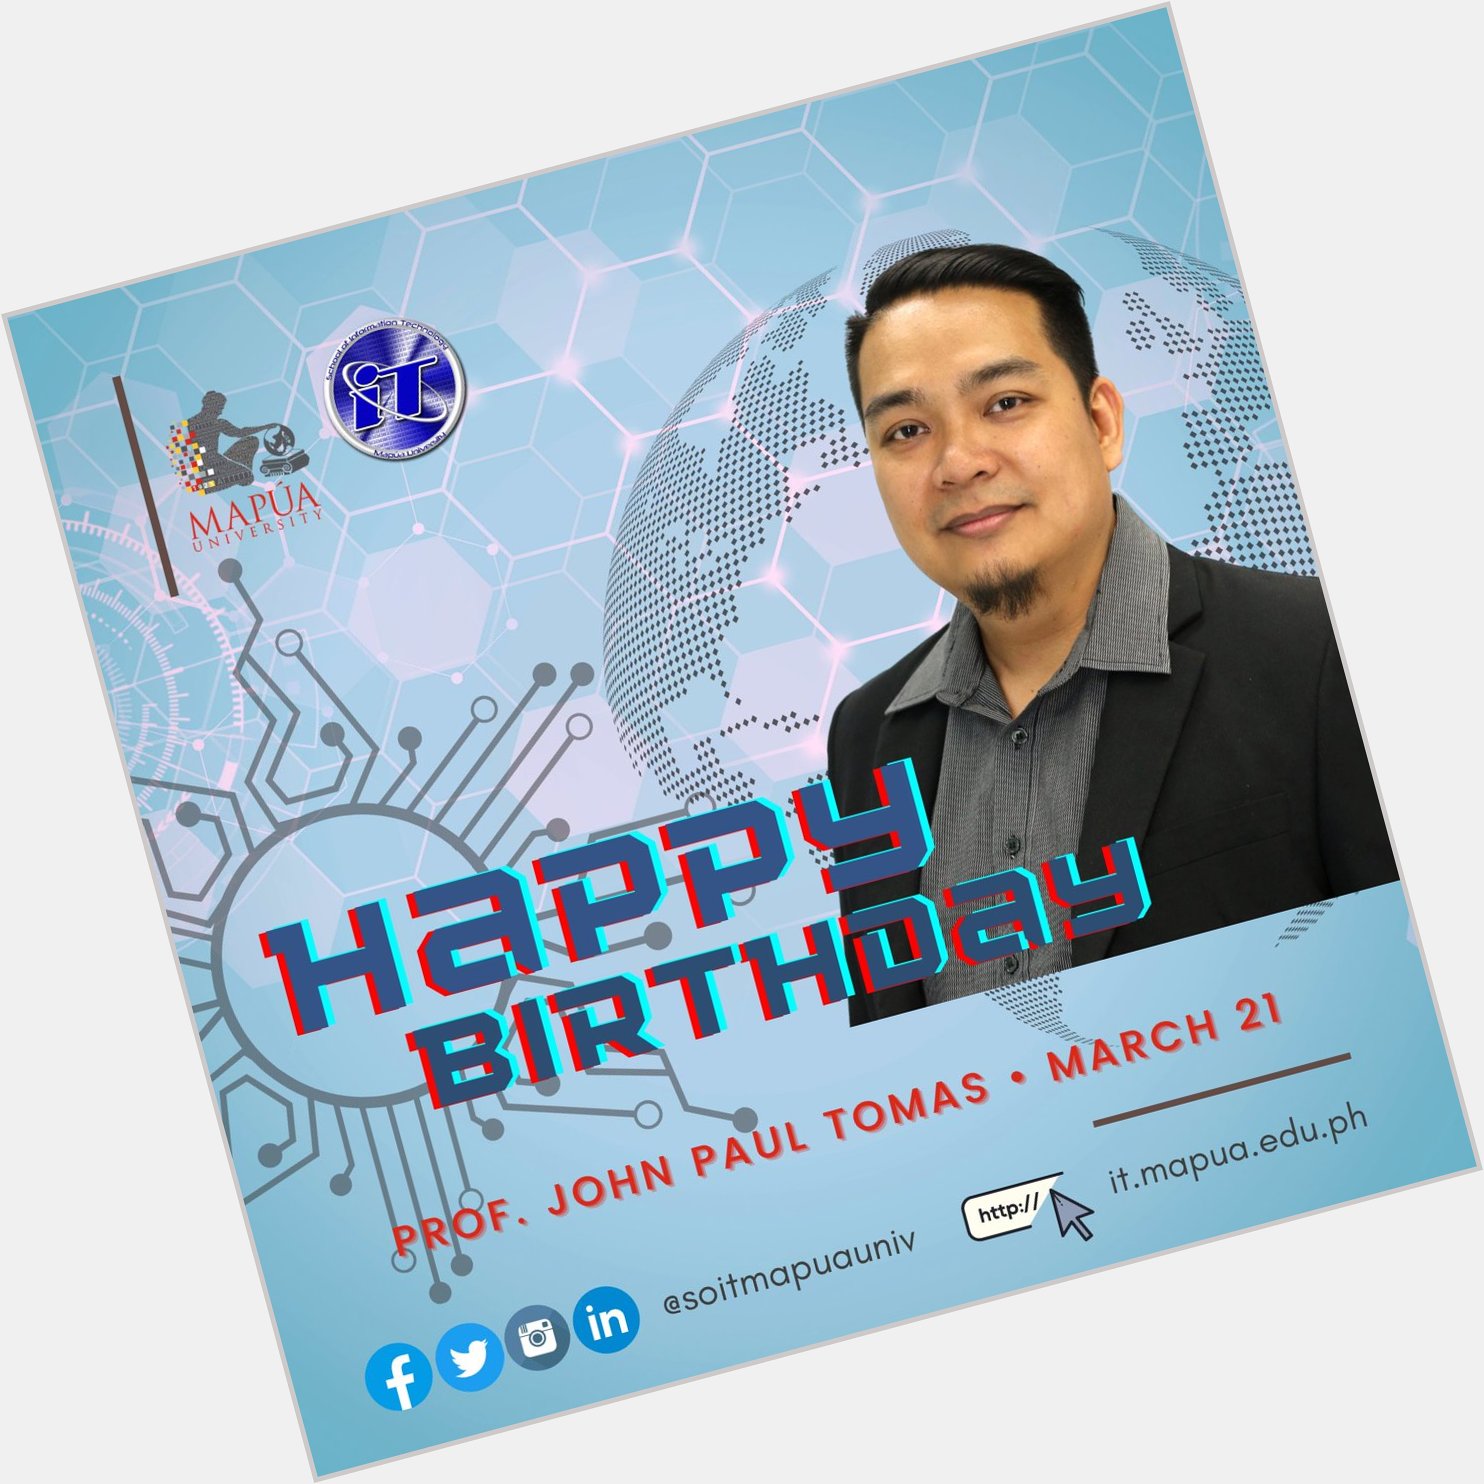 Happy birthday to Prof. John Paul Tomas!
Let us send him our warmest greetings on his special day. 